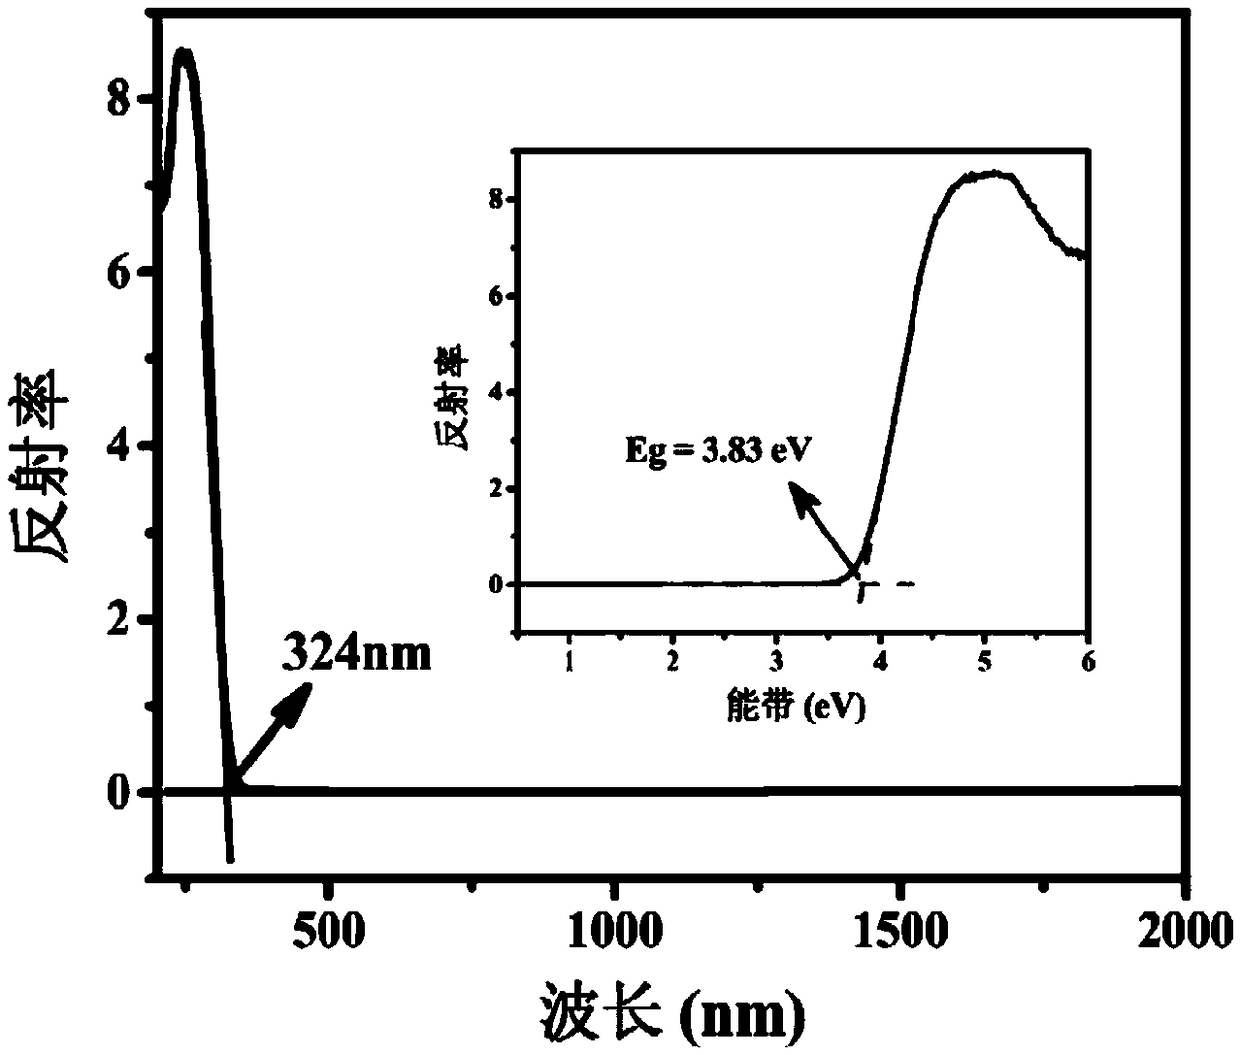 Intermediate infrared optical doubling frequency crystal fluorinated tungsten potassium iodate material as well as preparation and application thereof